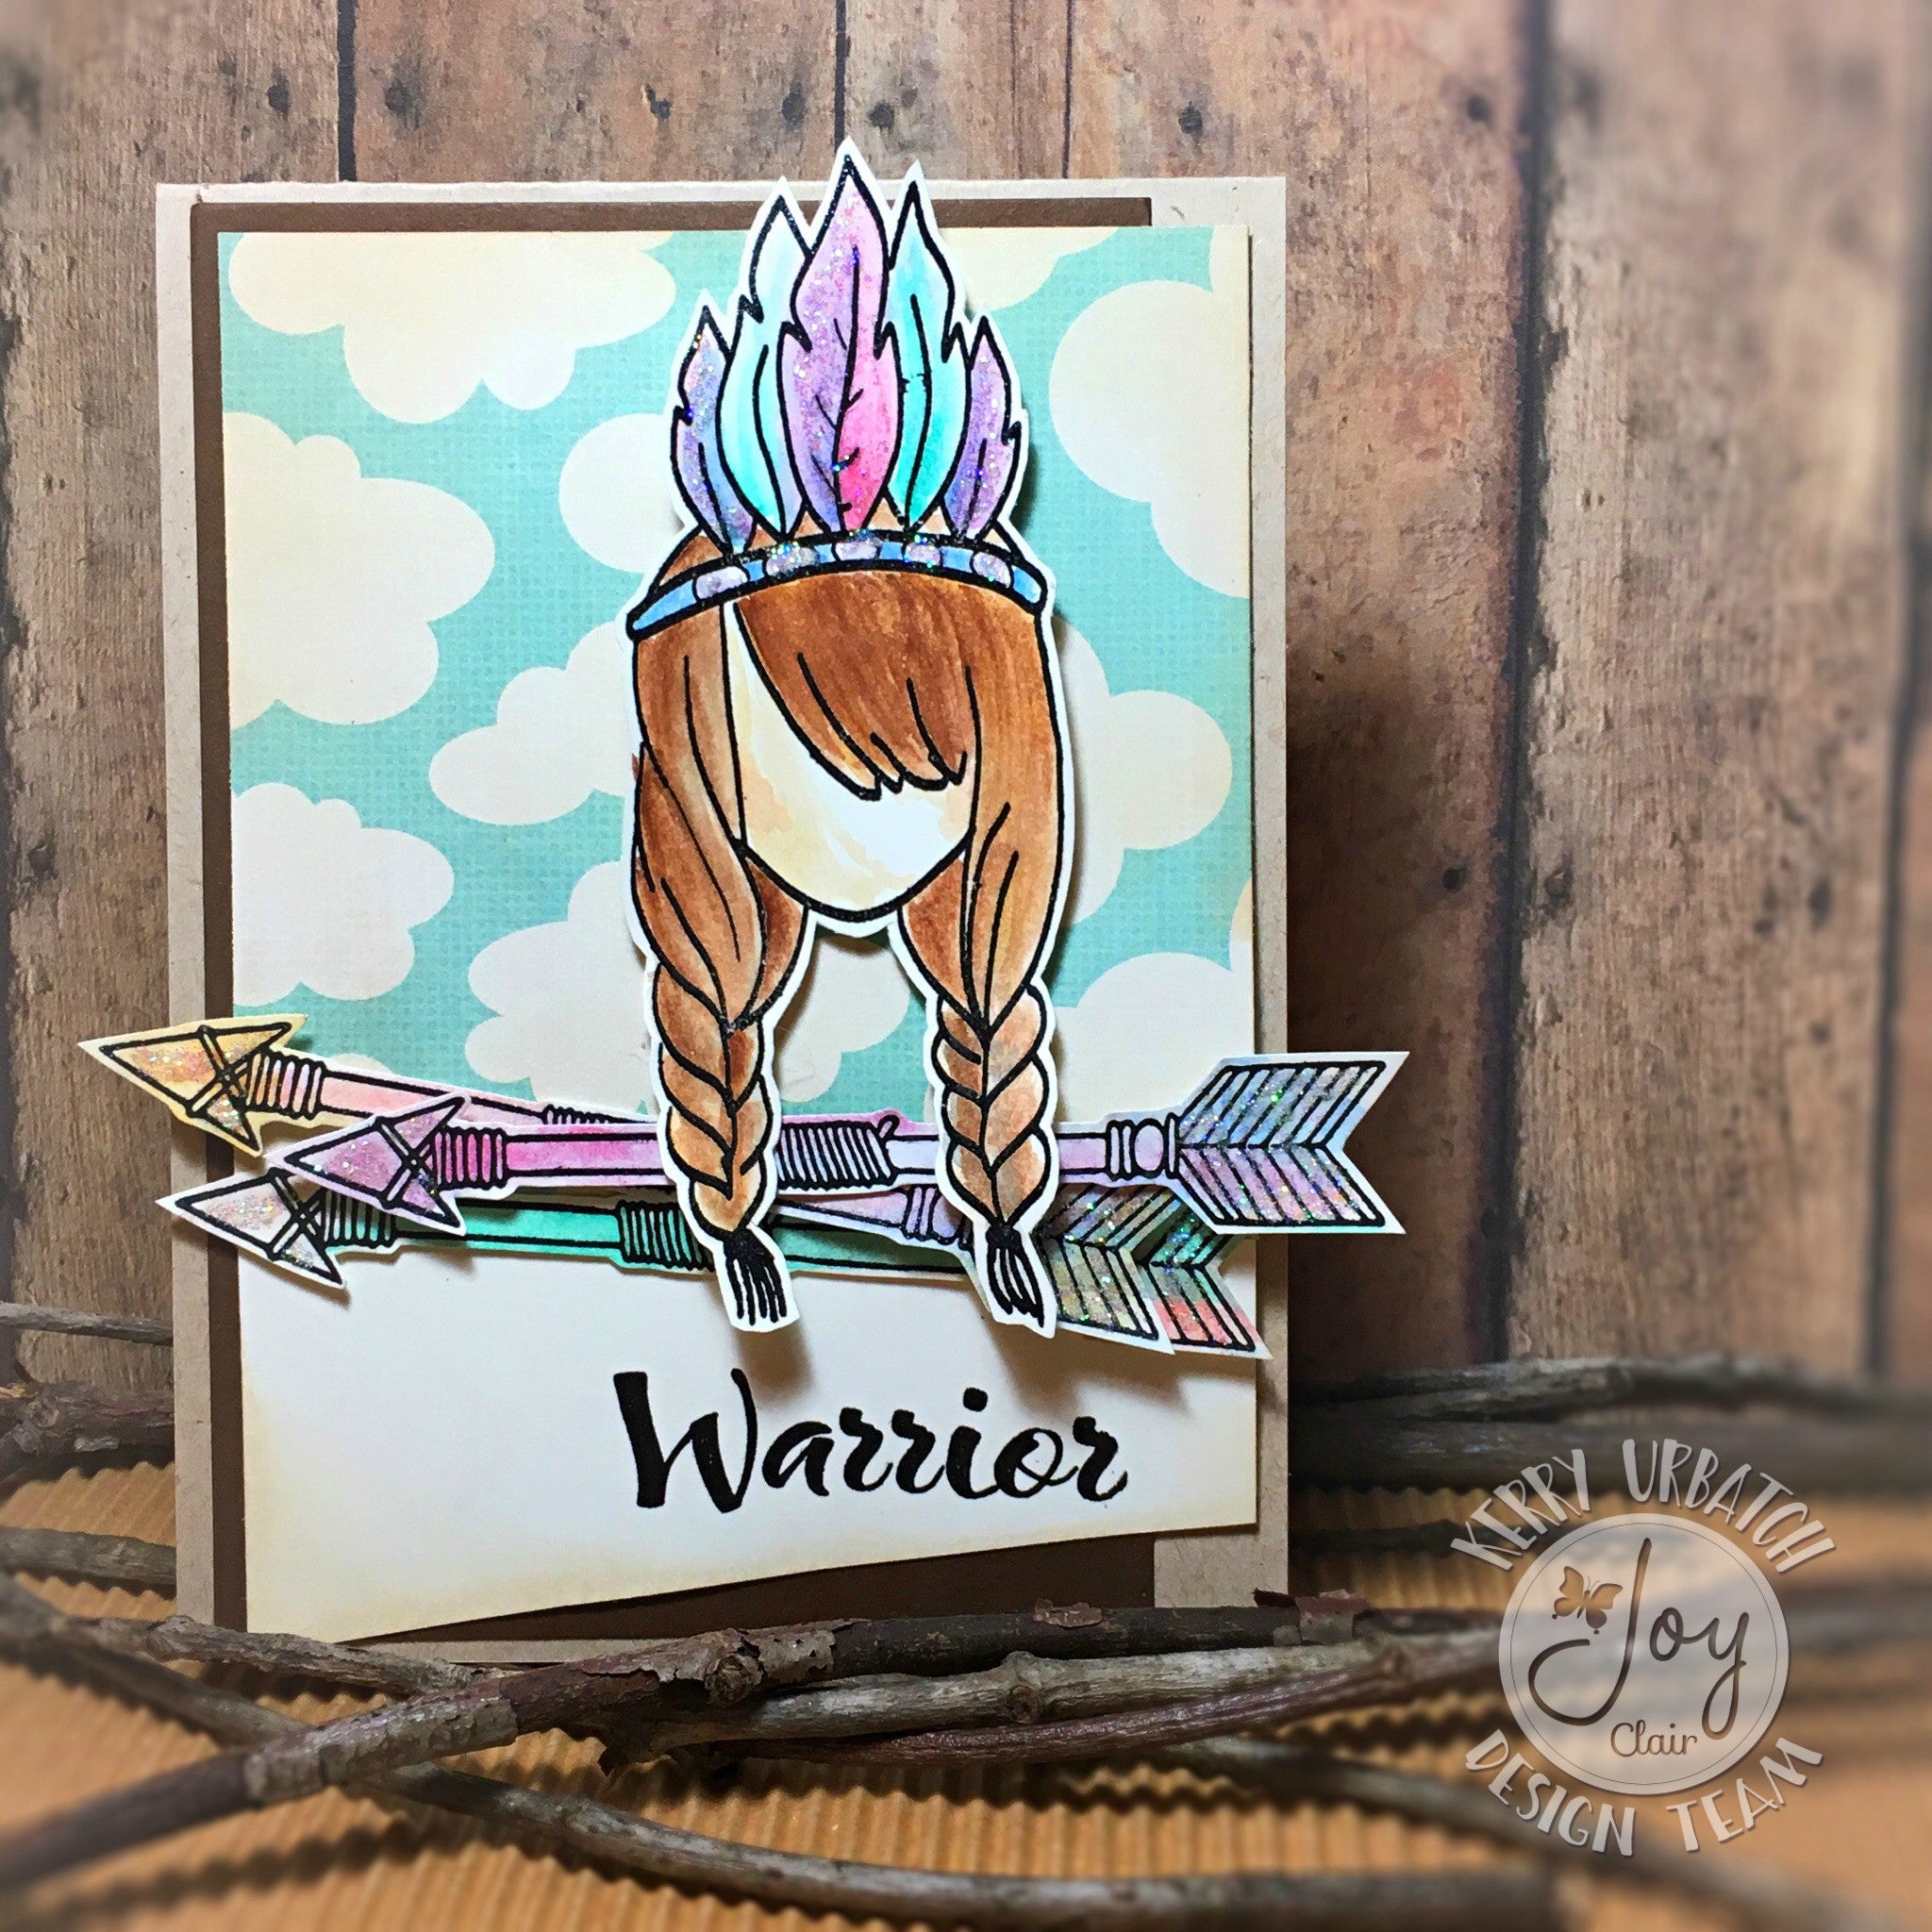  Clear Stamps - Prayer Warrior | Bible Journaling Clear Stamps - Joy Clair - 4